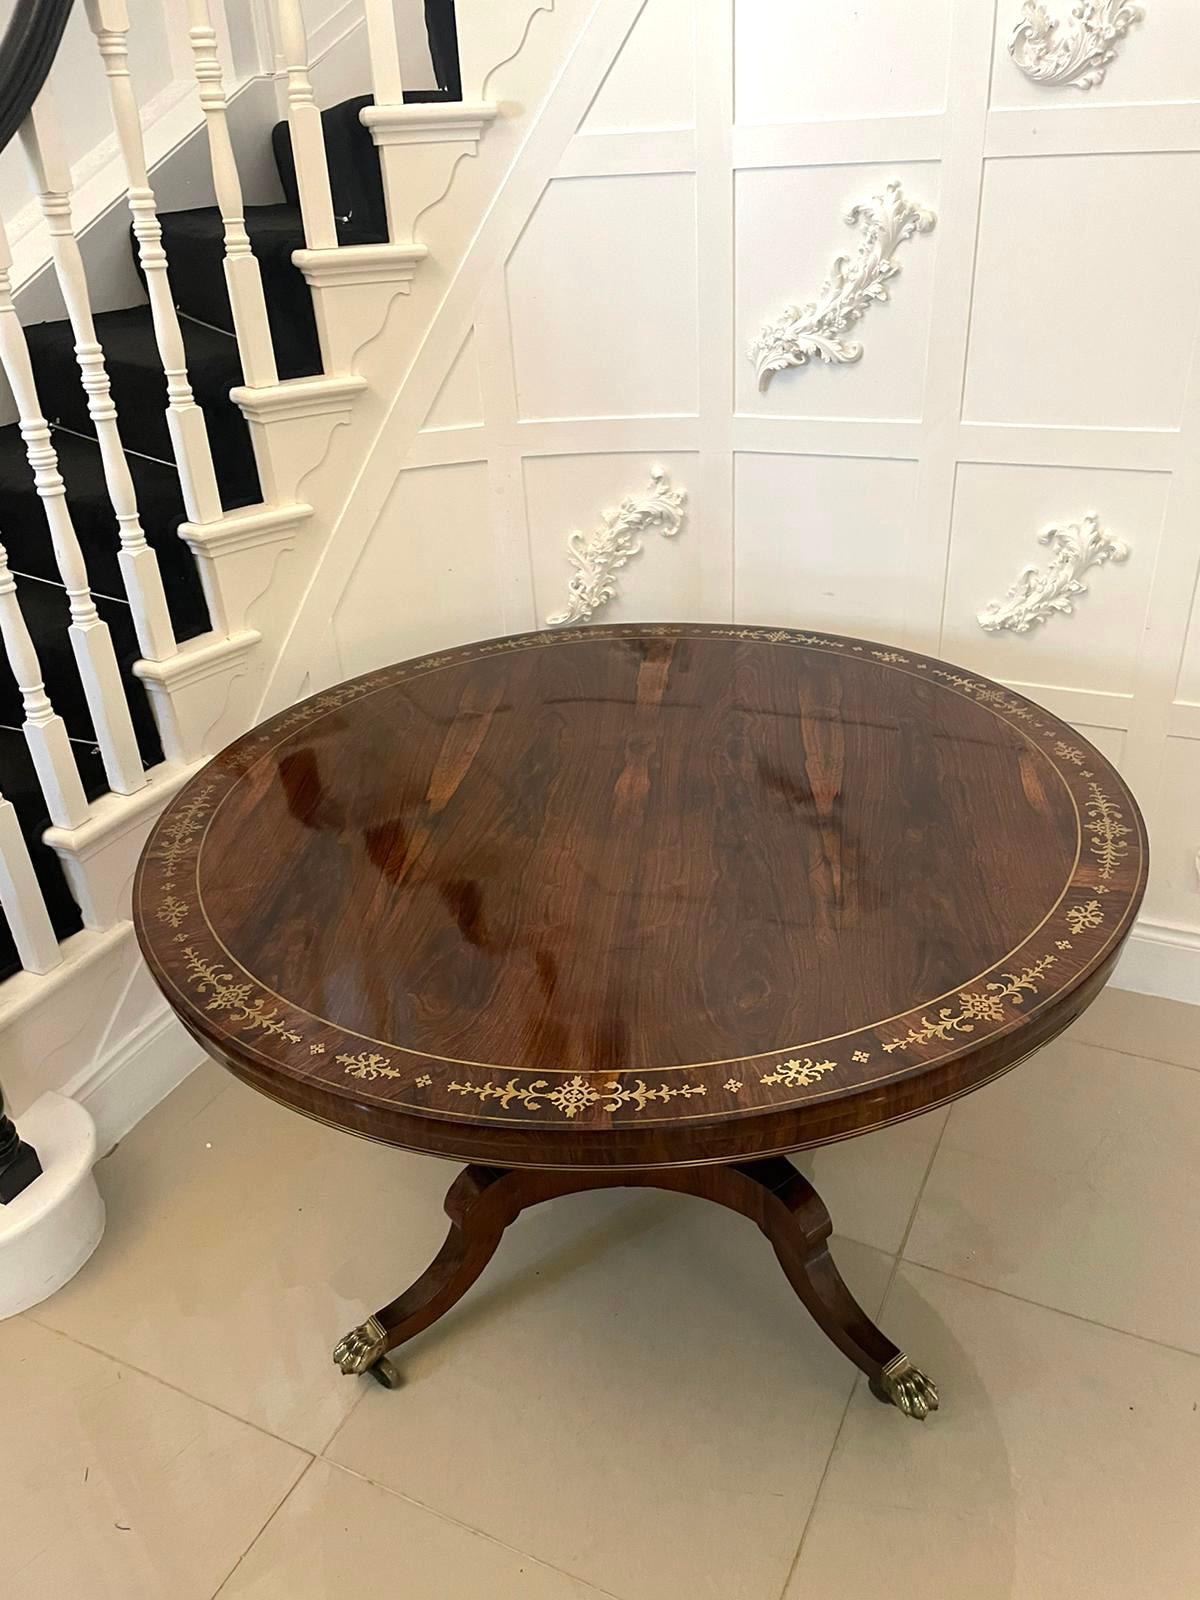 English Outstanding Quality Antique Regency Brass Inlaid Rosewood Centre/Dining Table 